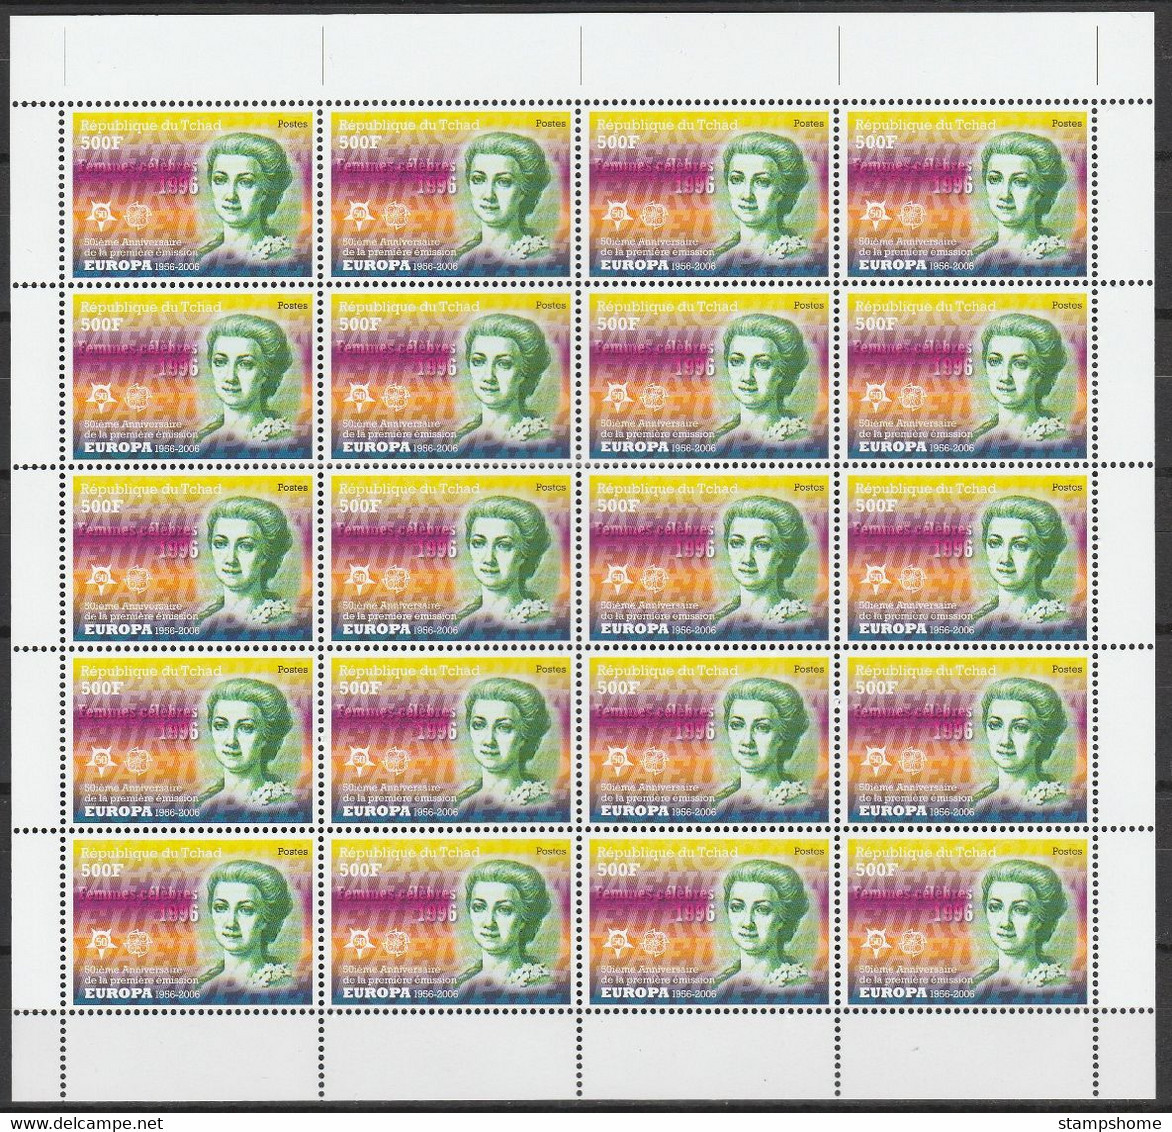 Europa Cept - 2005 - Tchad, Chad - 8.Complete Sheetlet of 20 set - (perf.) ** MNH